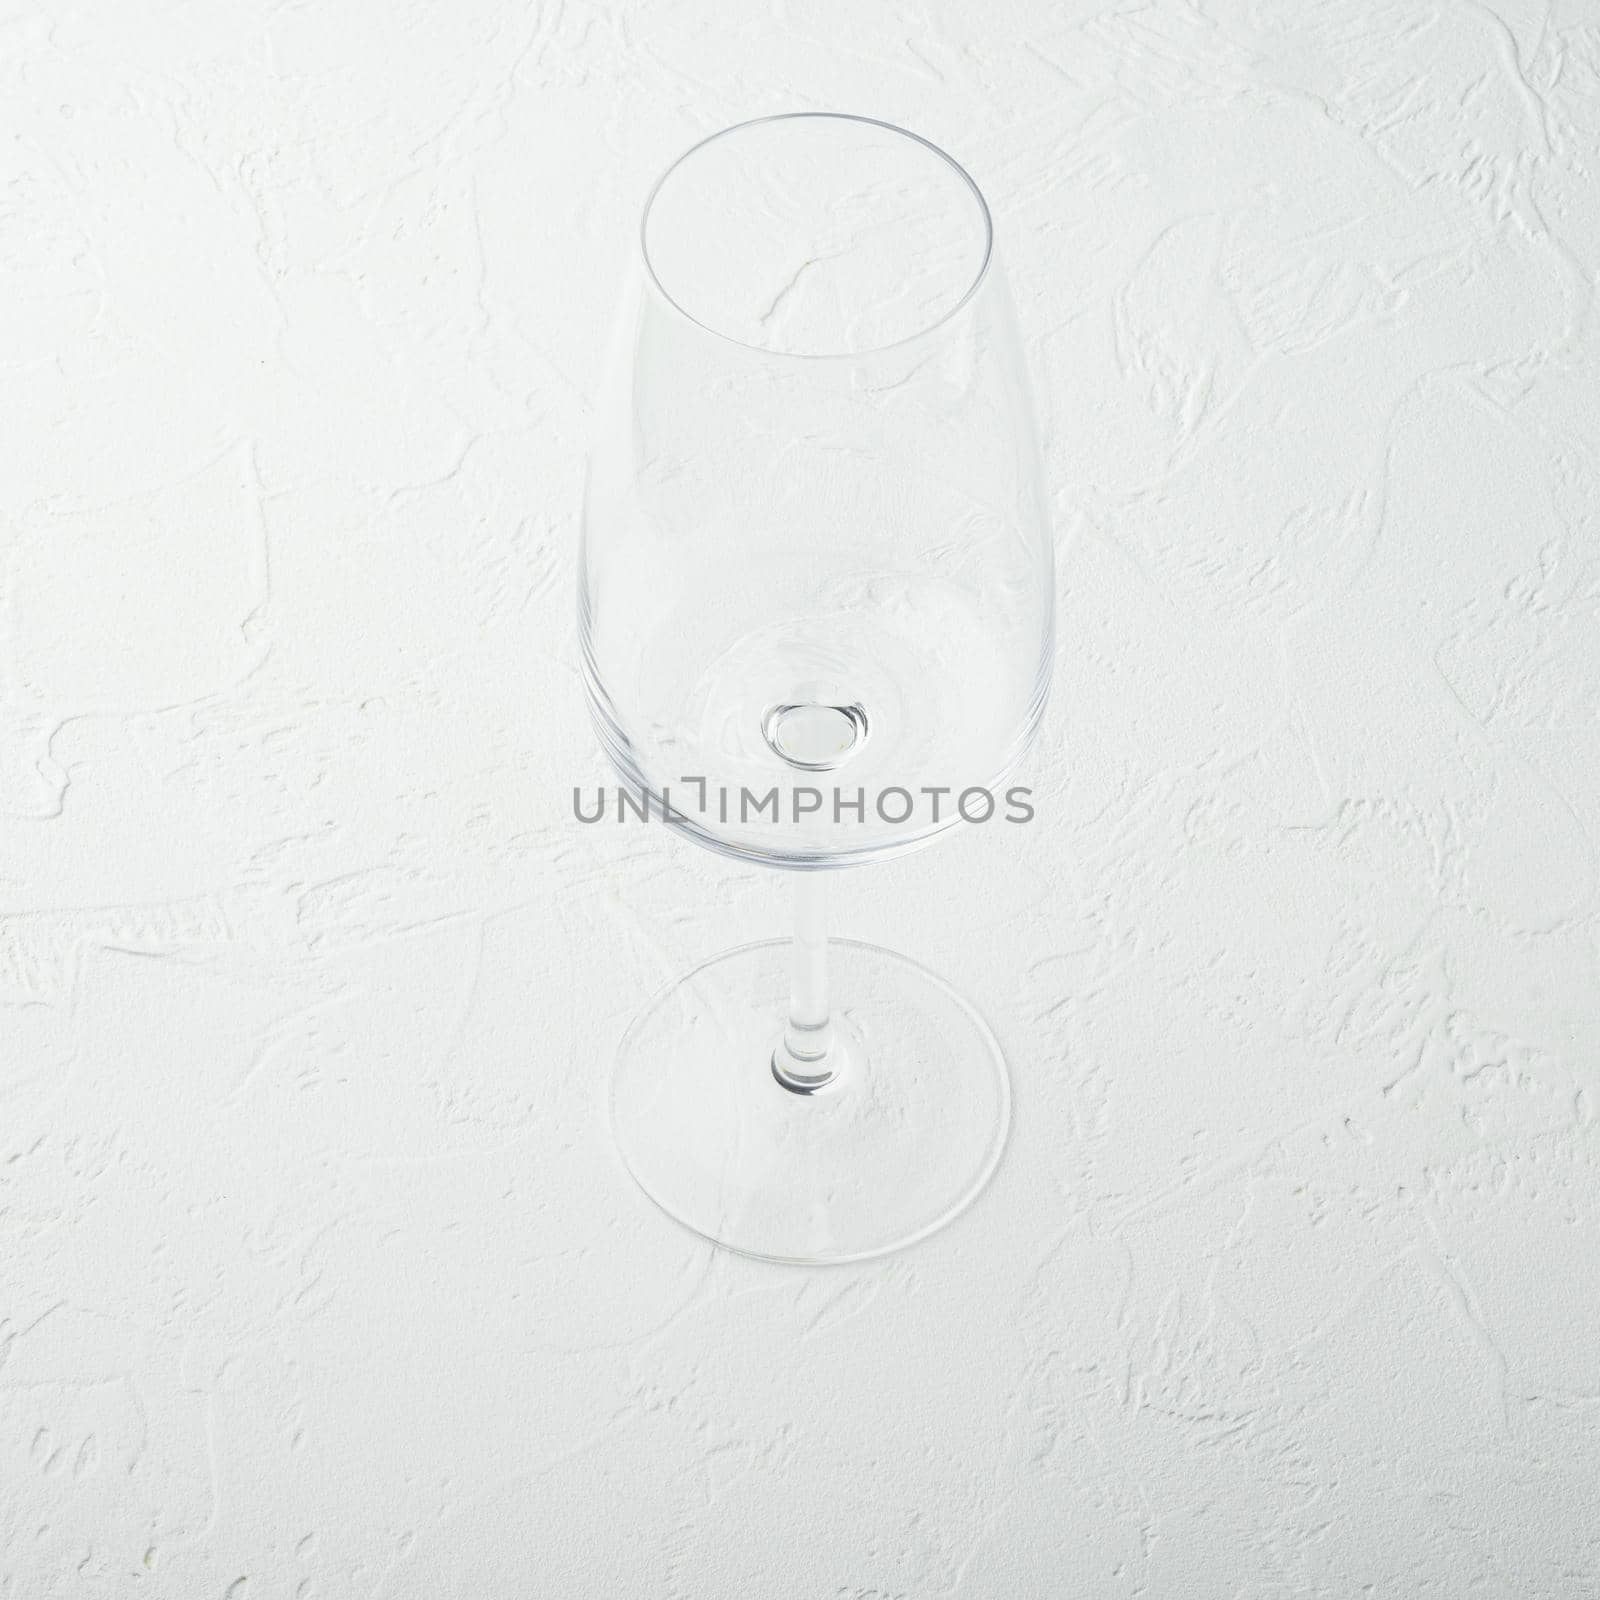 Clean wine glass set, square format, on white stone background